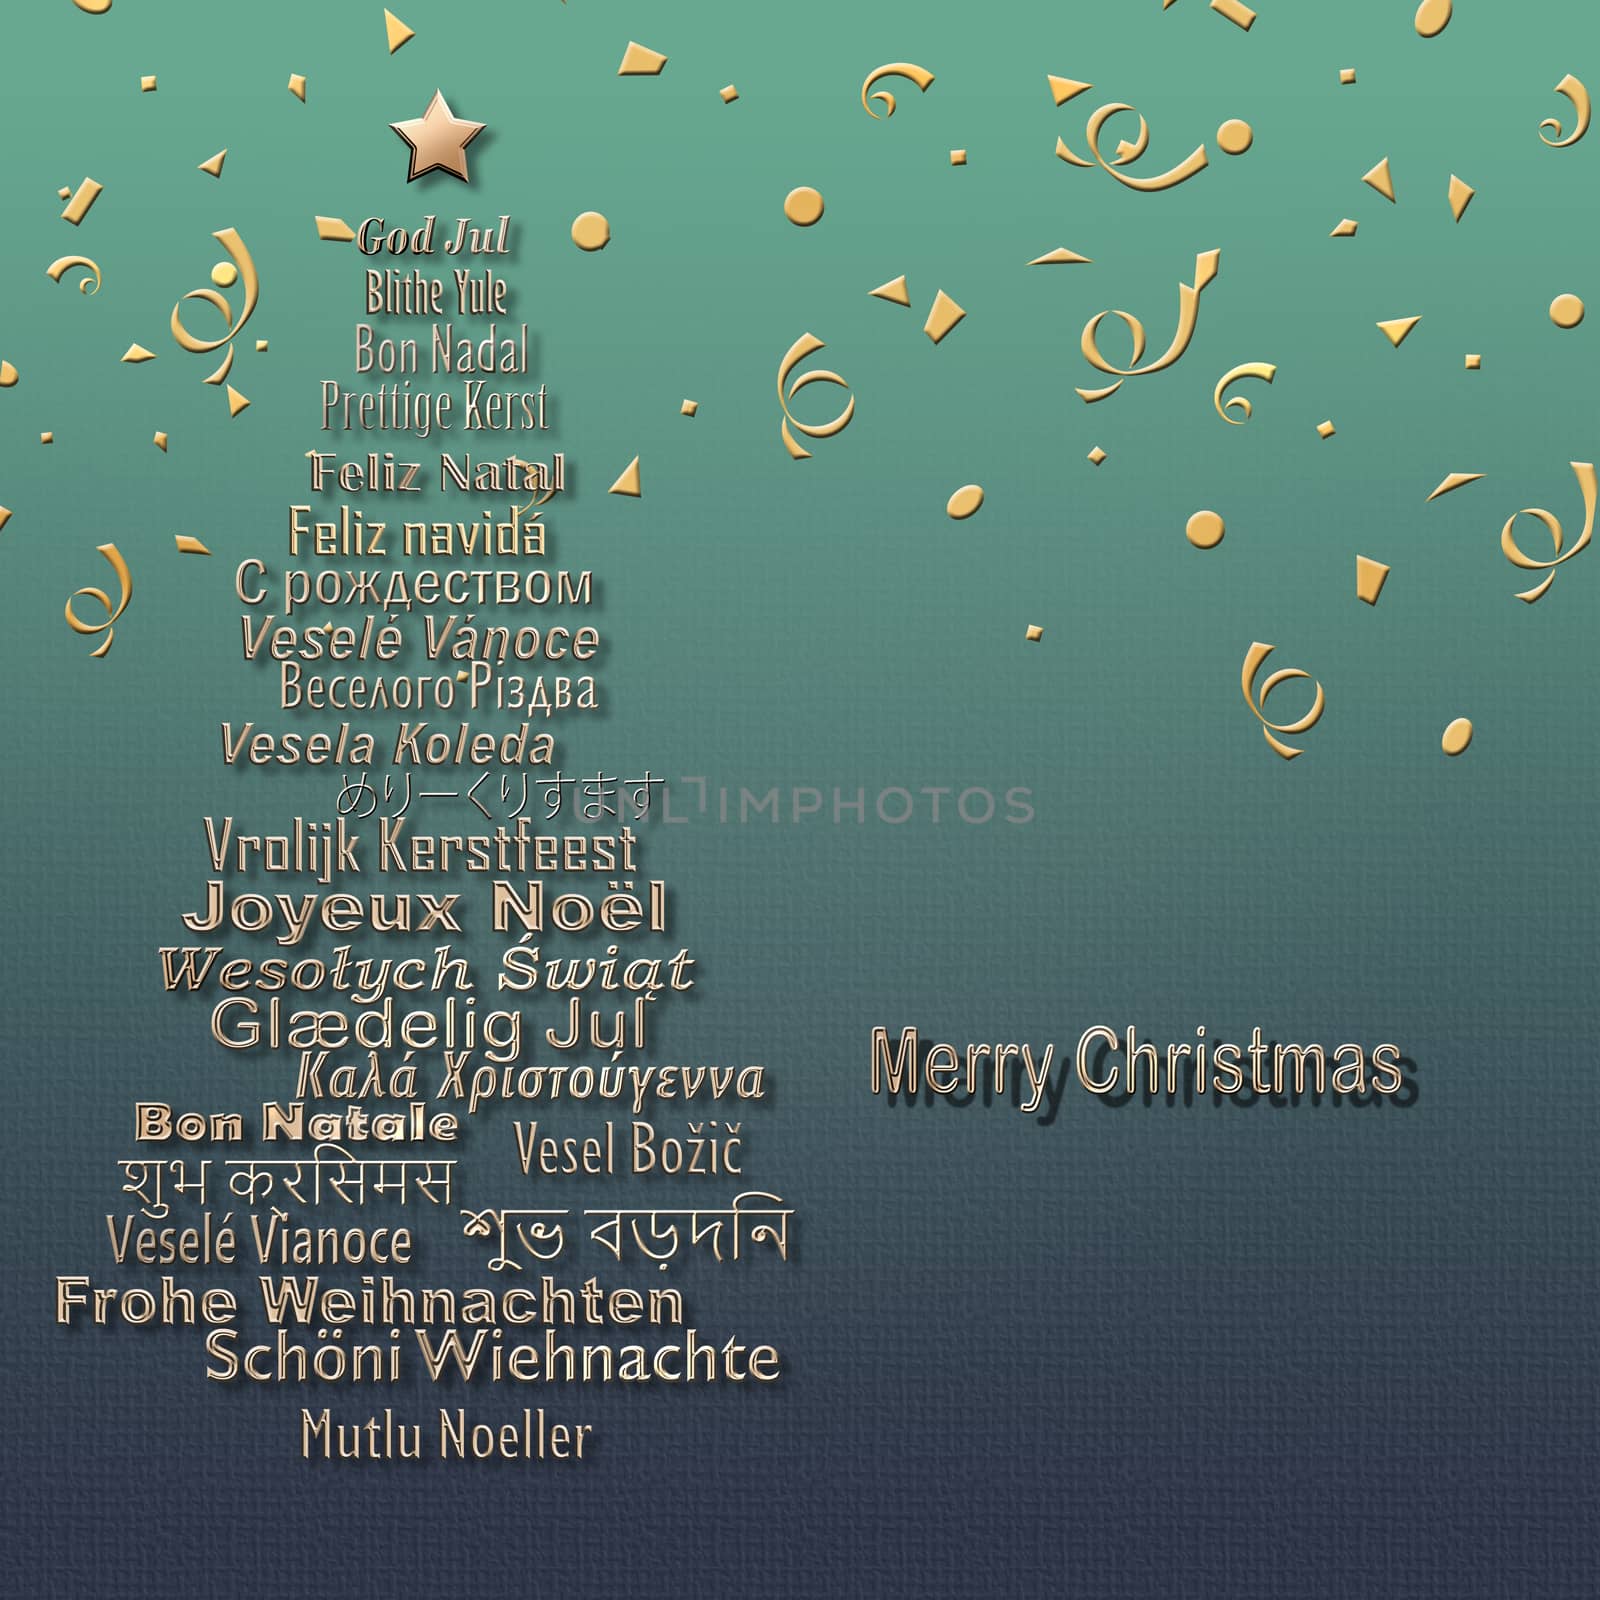 Merry Christmas card in Different Languages by NelliPolk